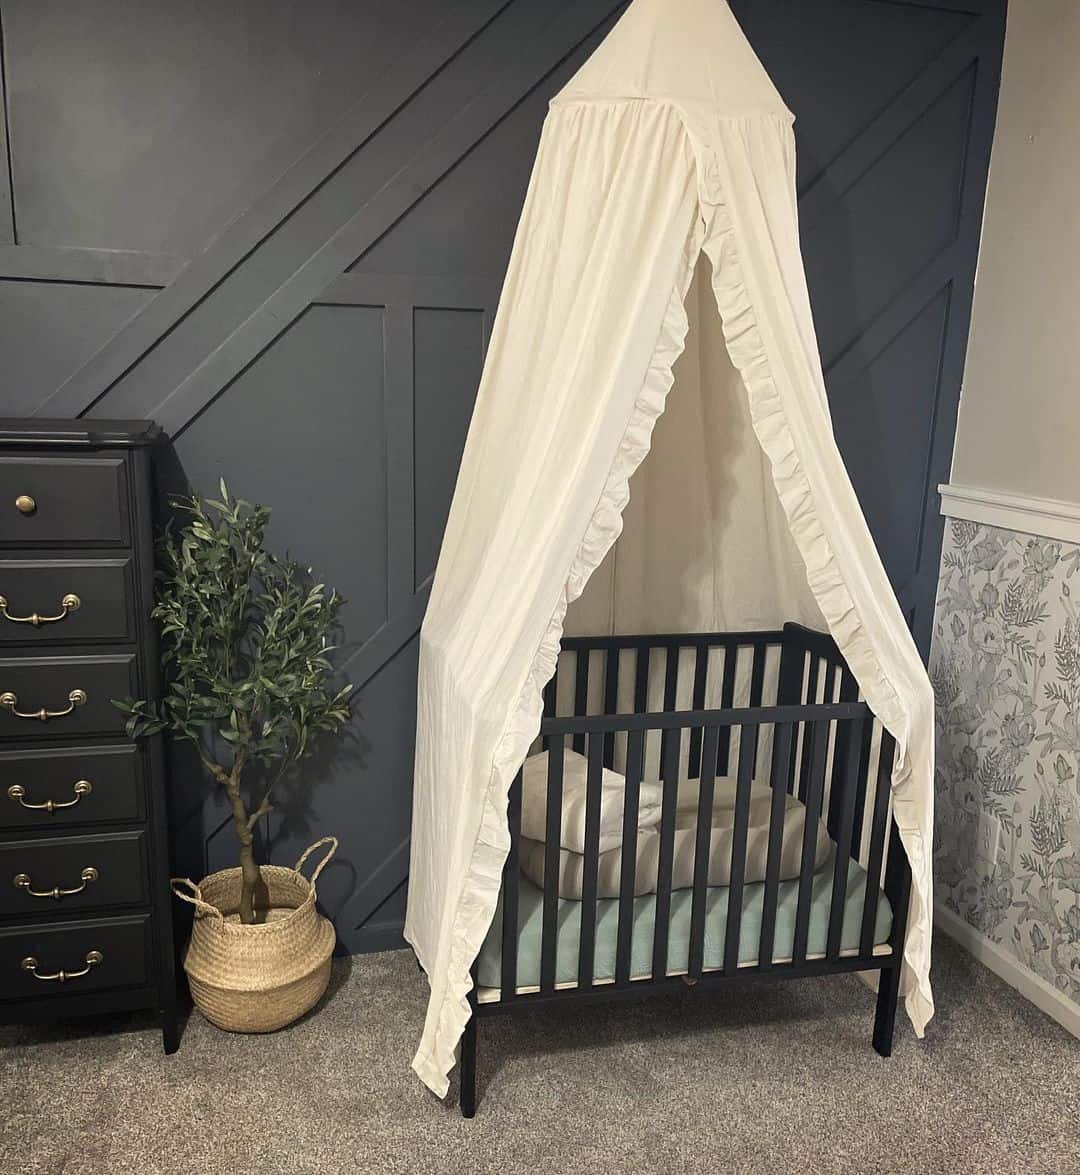 Features to Check for in a Mini Crib